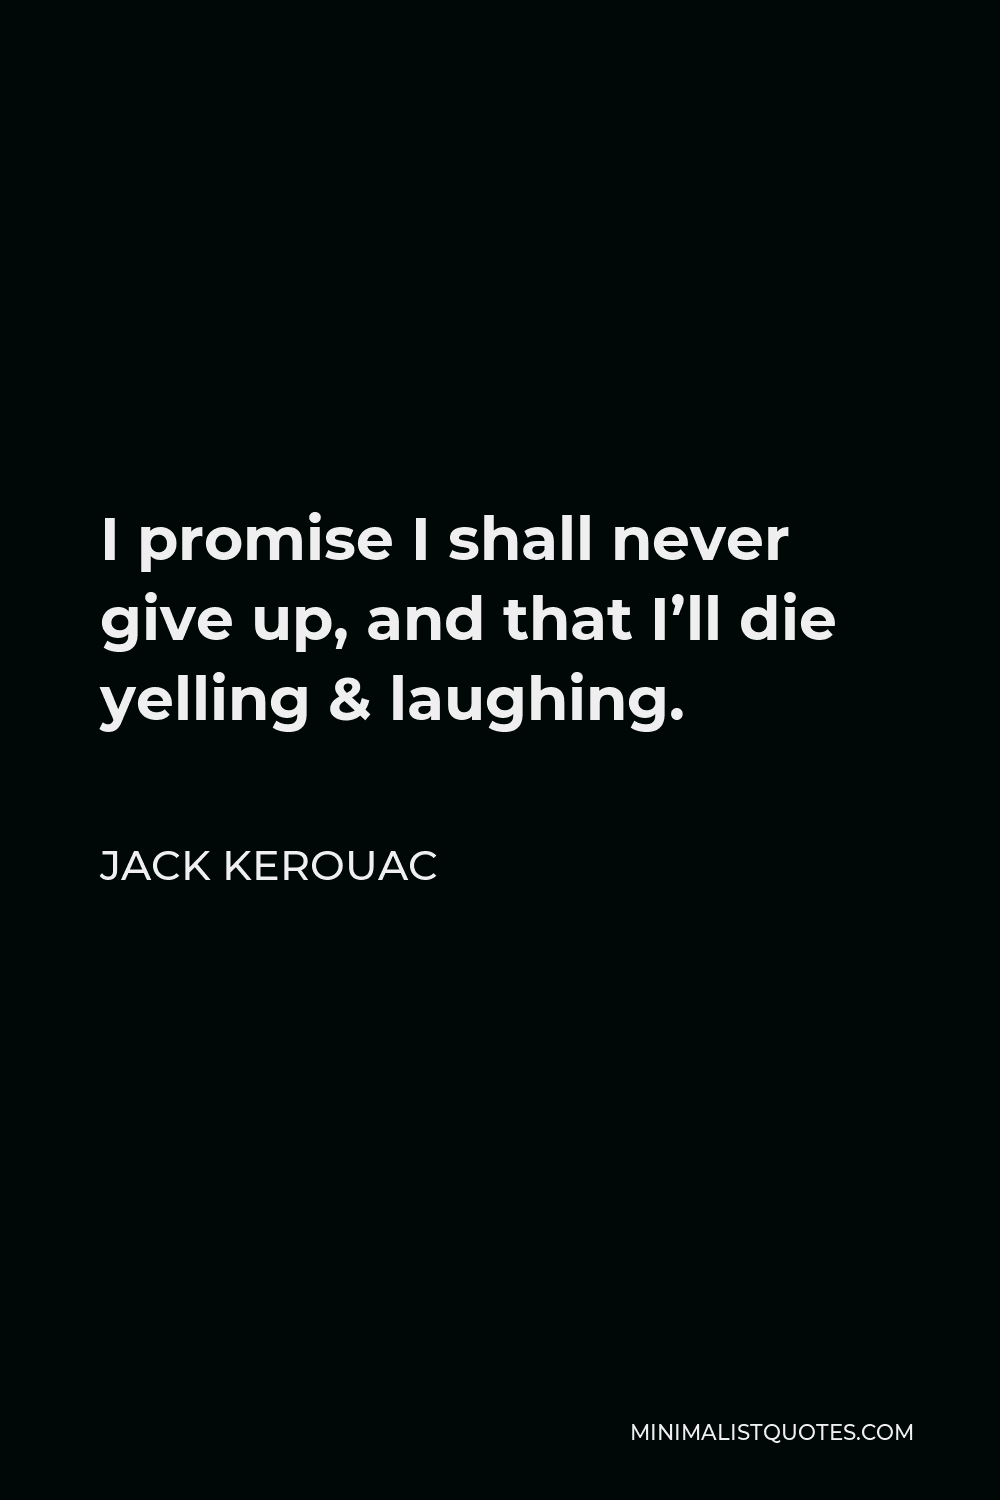 Jack Kerouac Quote: Some of my most neurotically fierce bitterness is ...